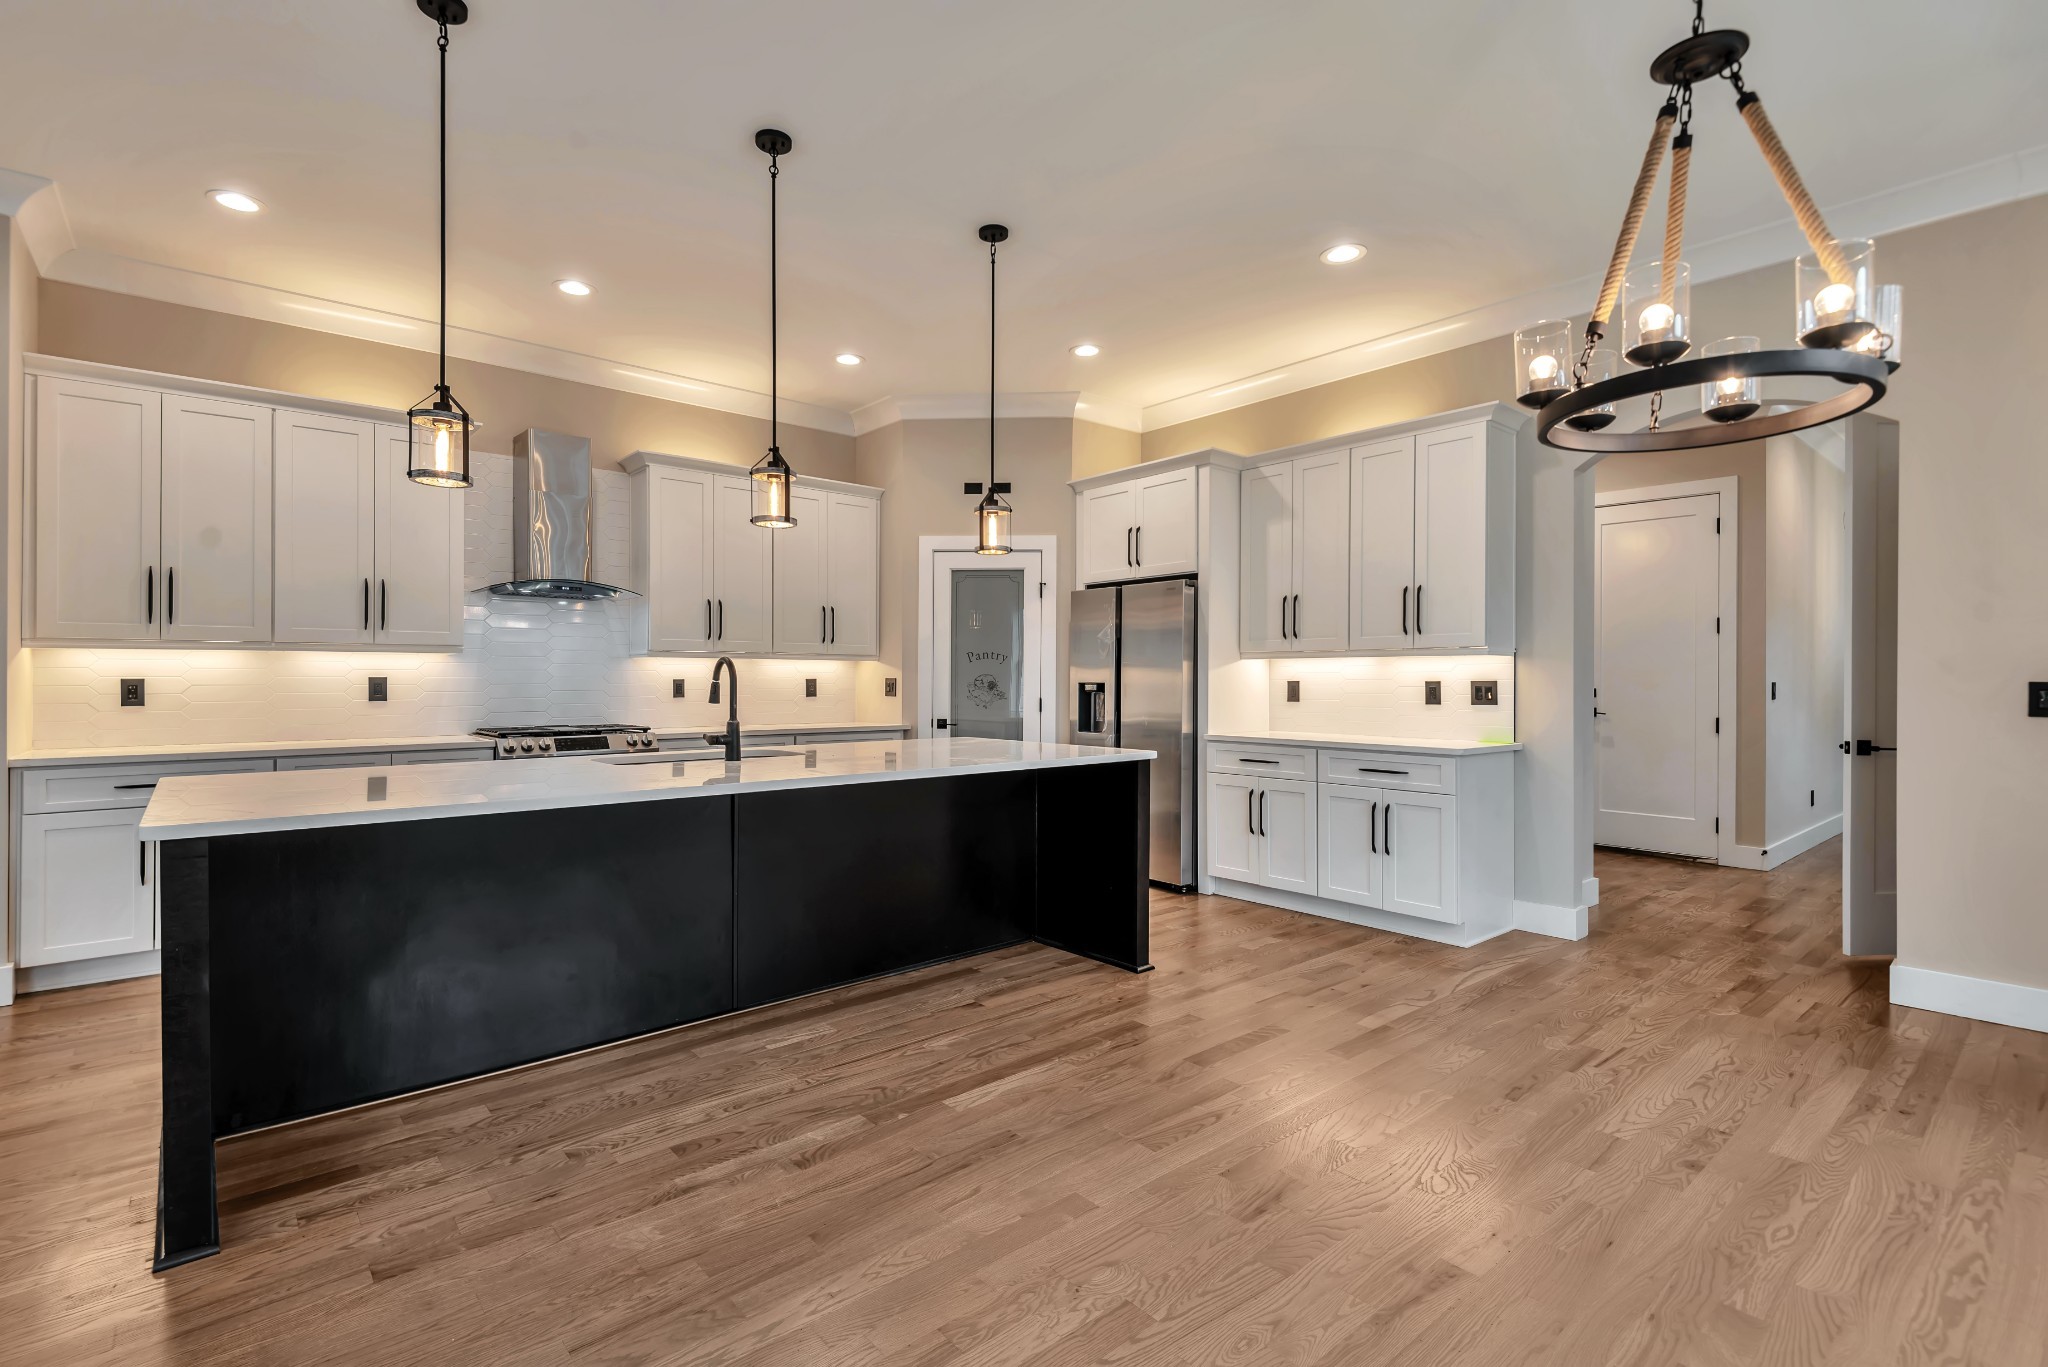 a room with stainless steel appliances kitchen island granite countertop a wooden floor